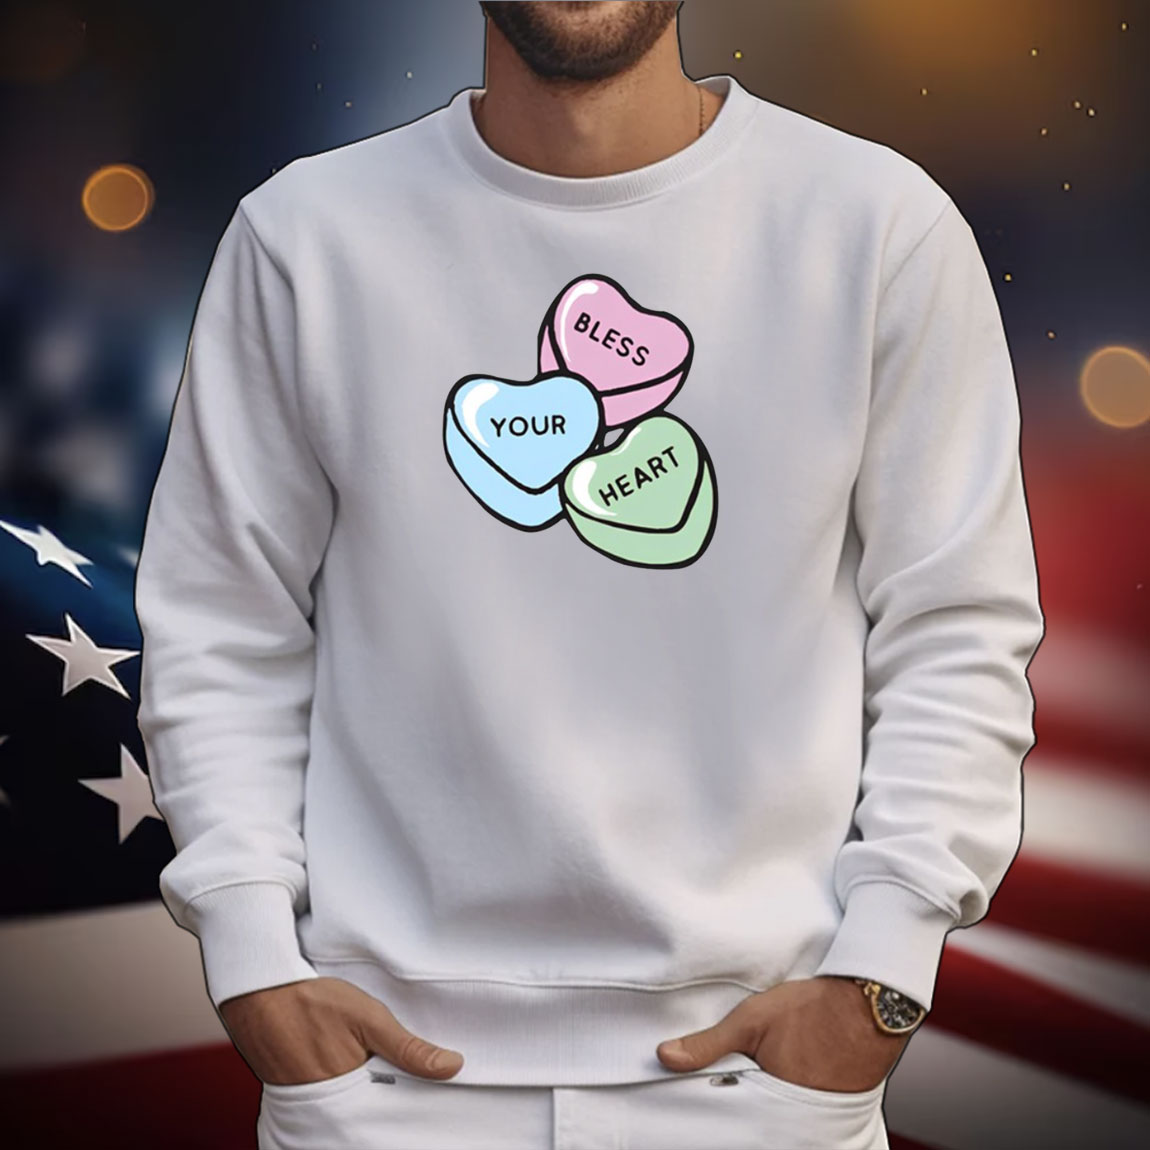 The Bless Your Candy Hearts Tee TShirt